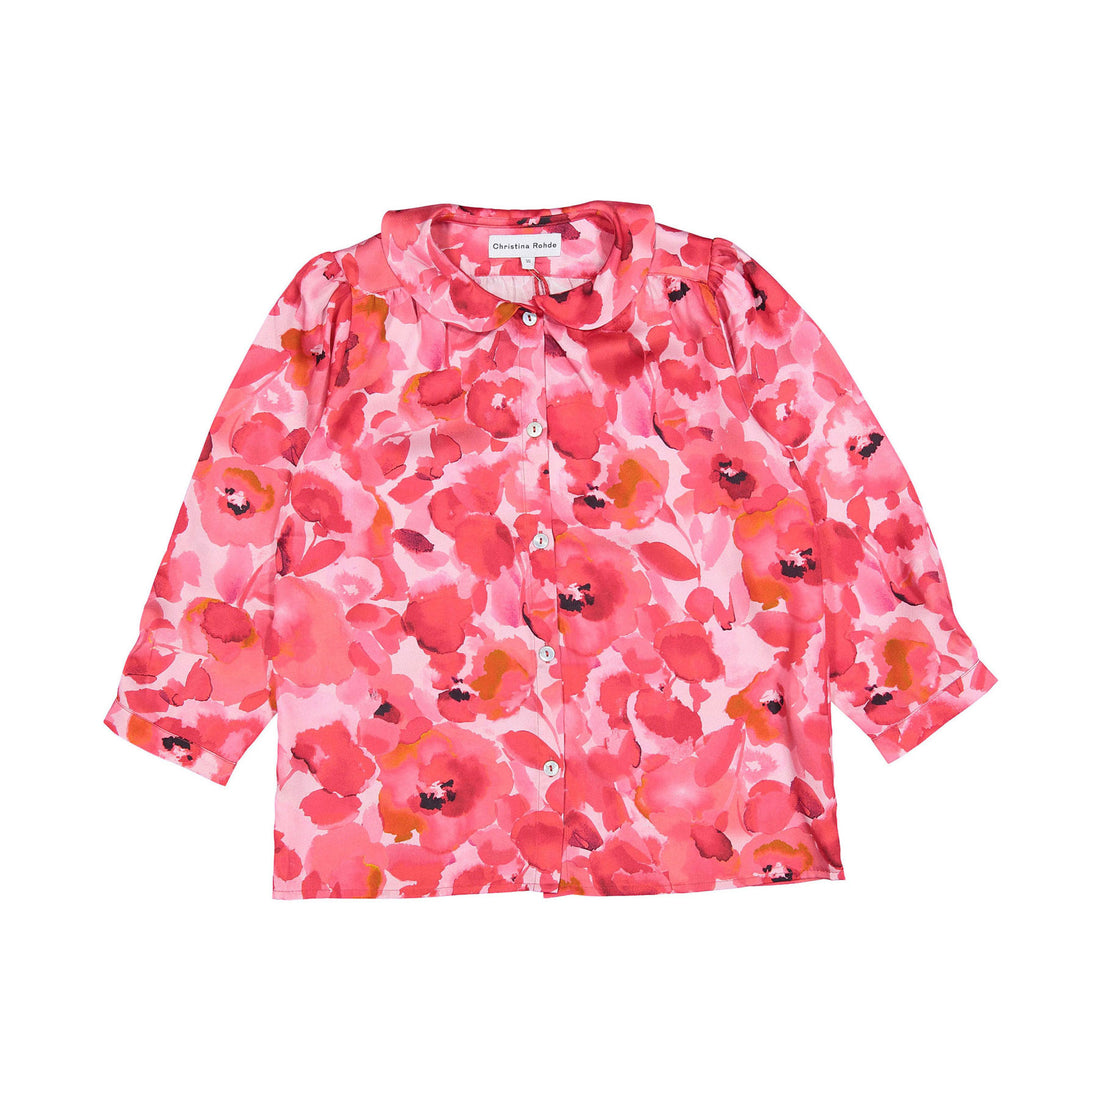 Christina Rohde Bright Pink Floral Blouse